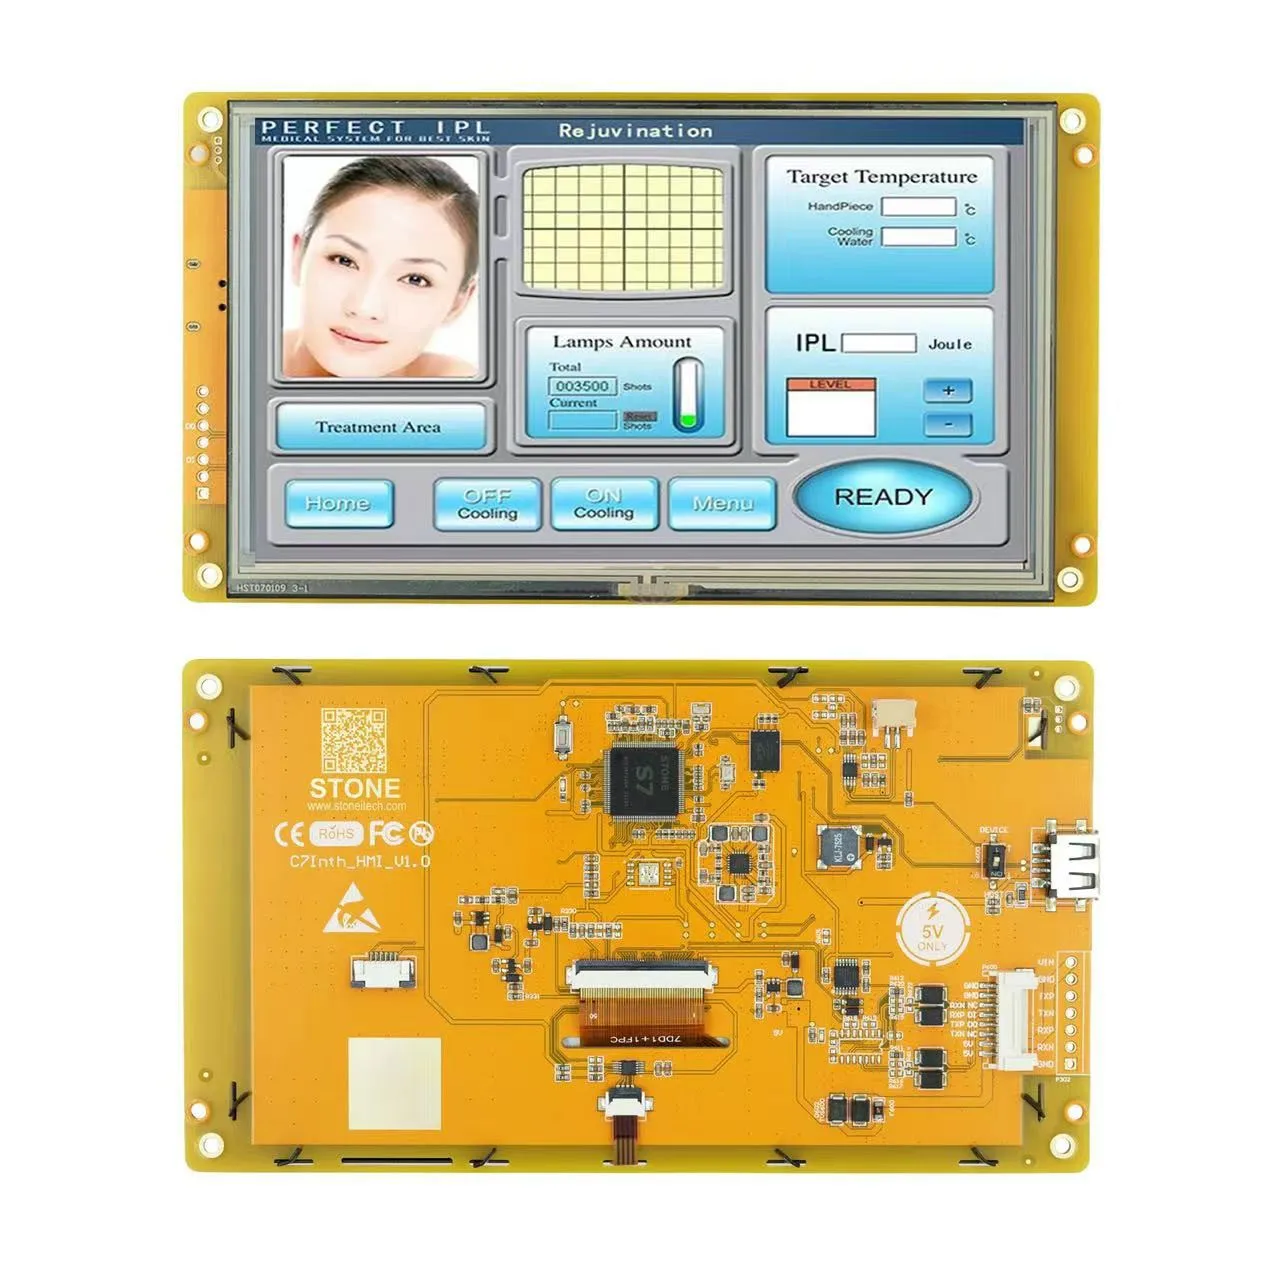 7.0 TFT Touch Screen complimentary GUI Software that makes programming fast and easy for engineers The LCD touch screen